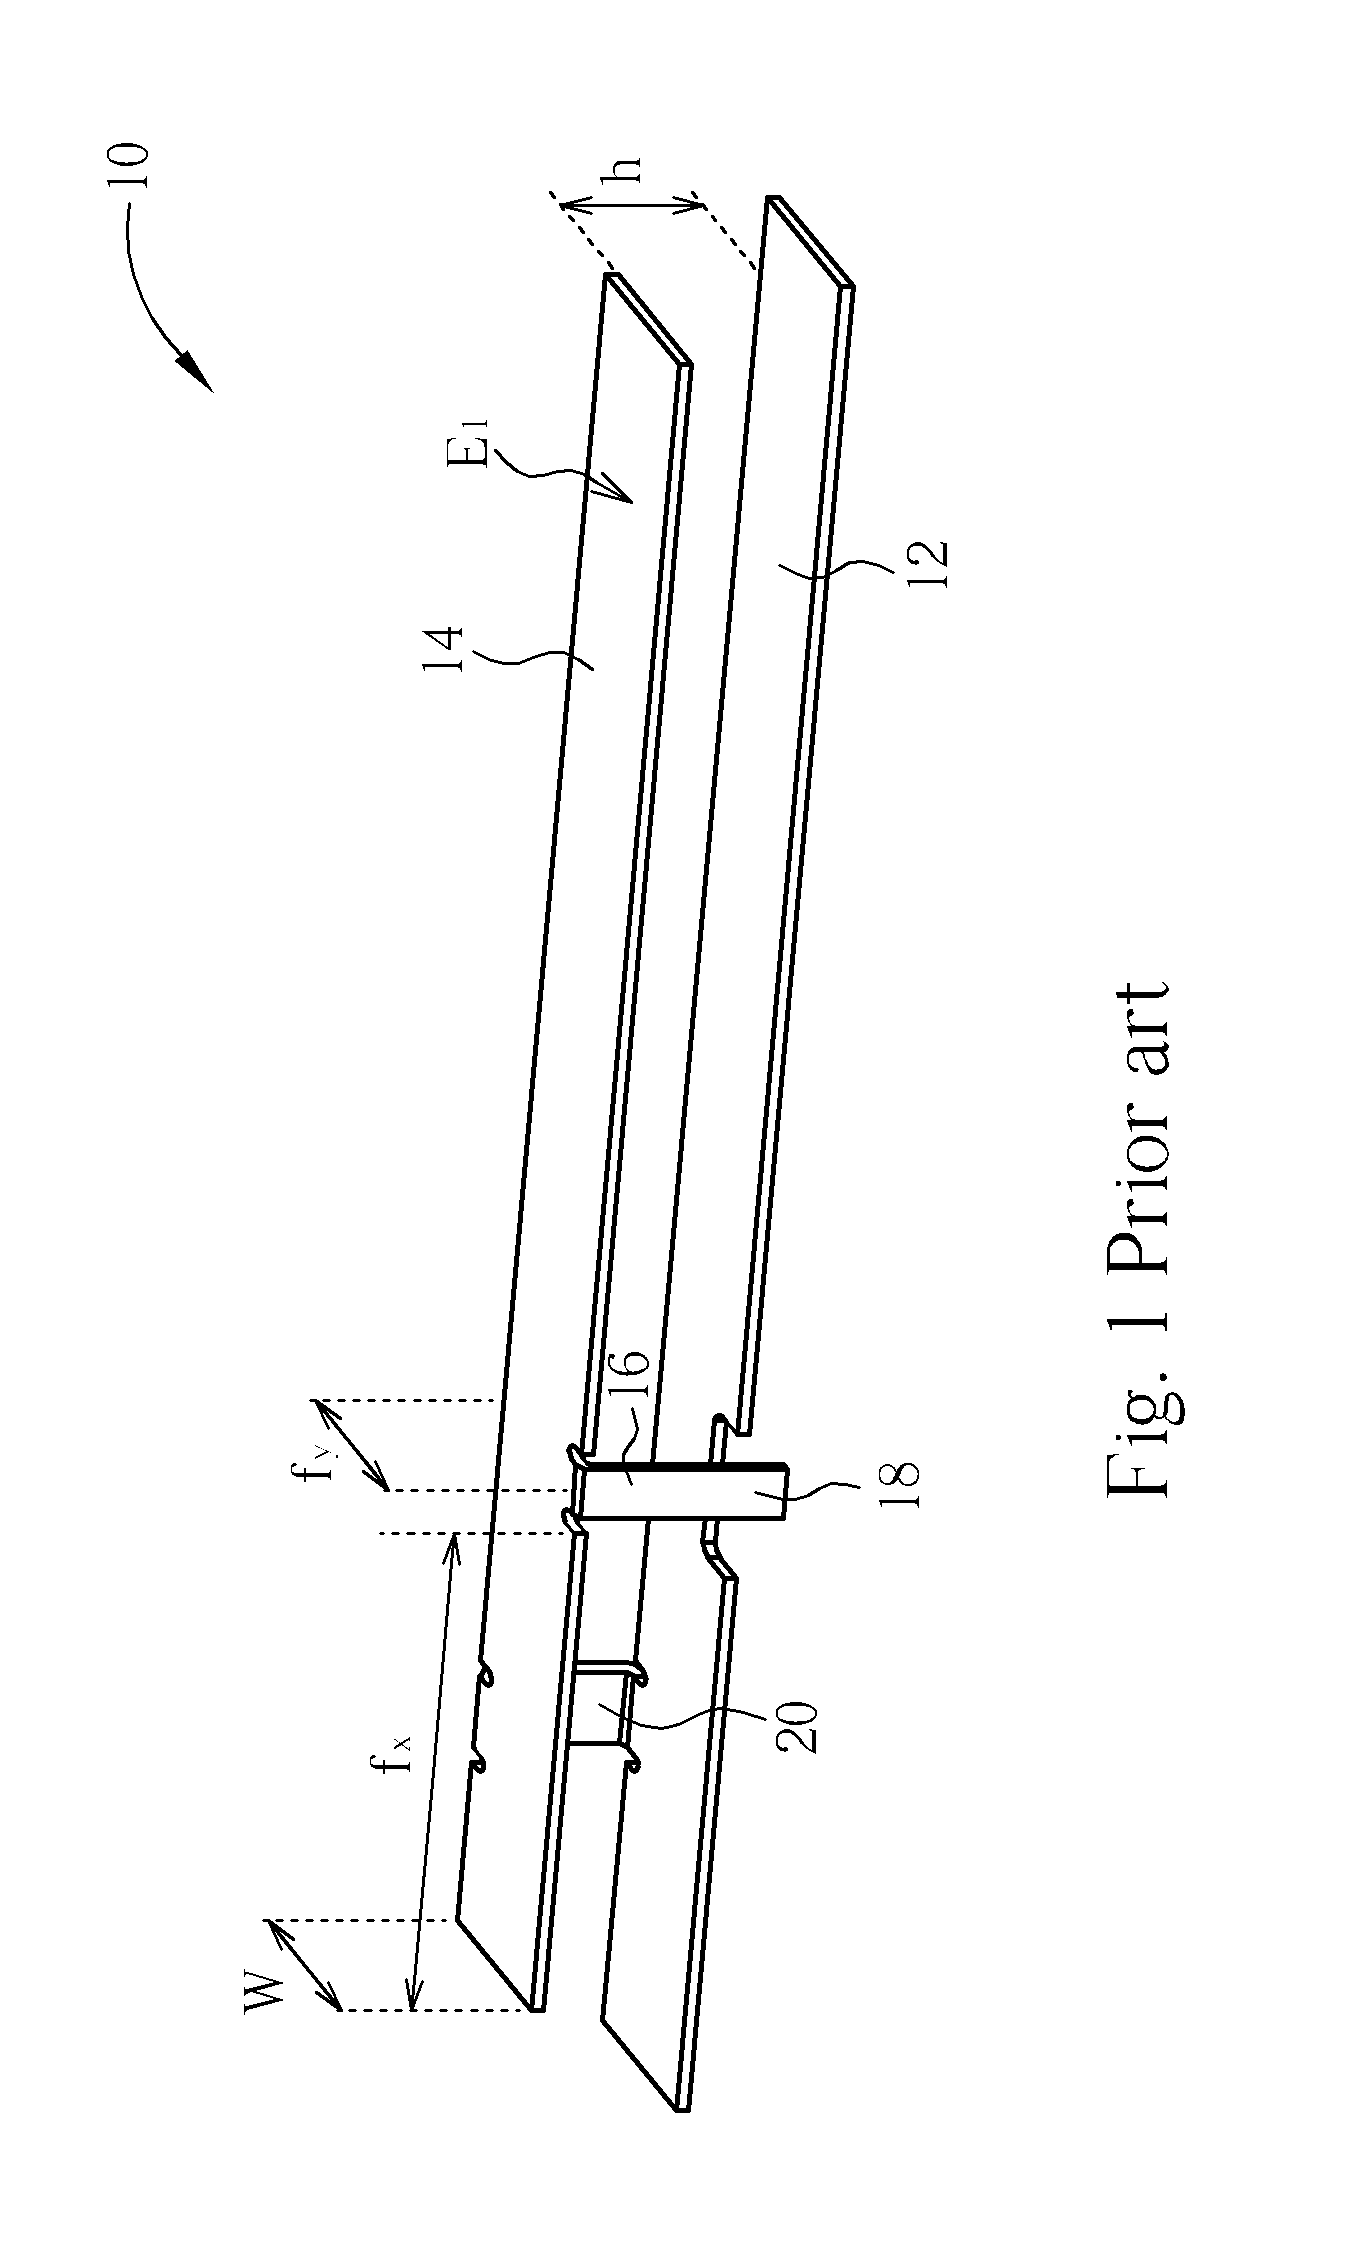 Planner inverted-F antenna having a rib-shaped radiation plate